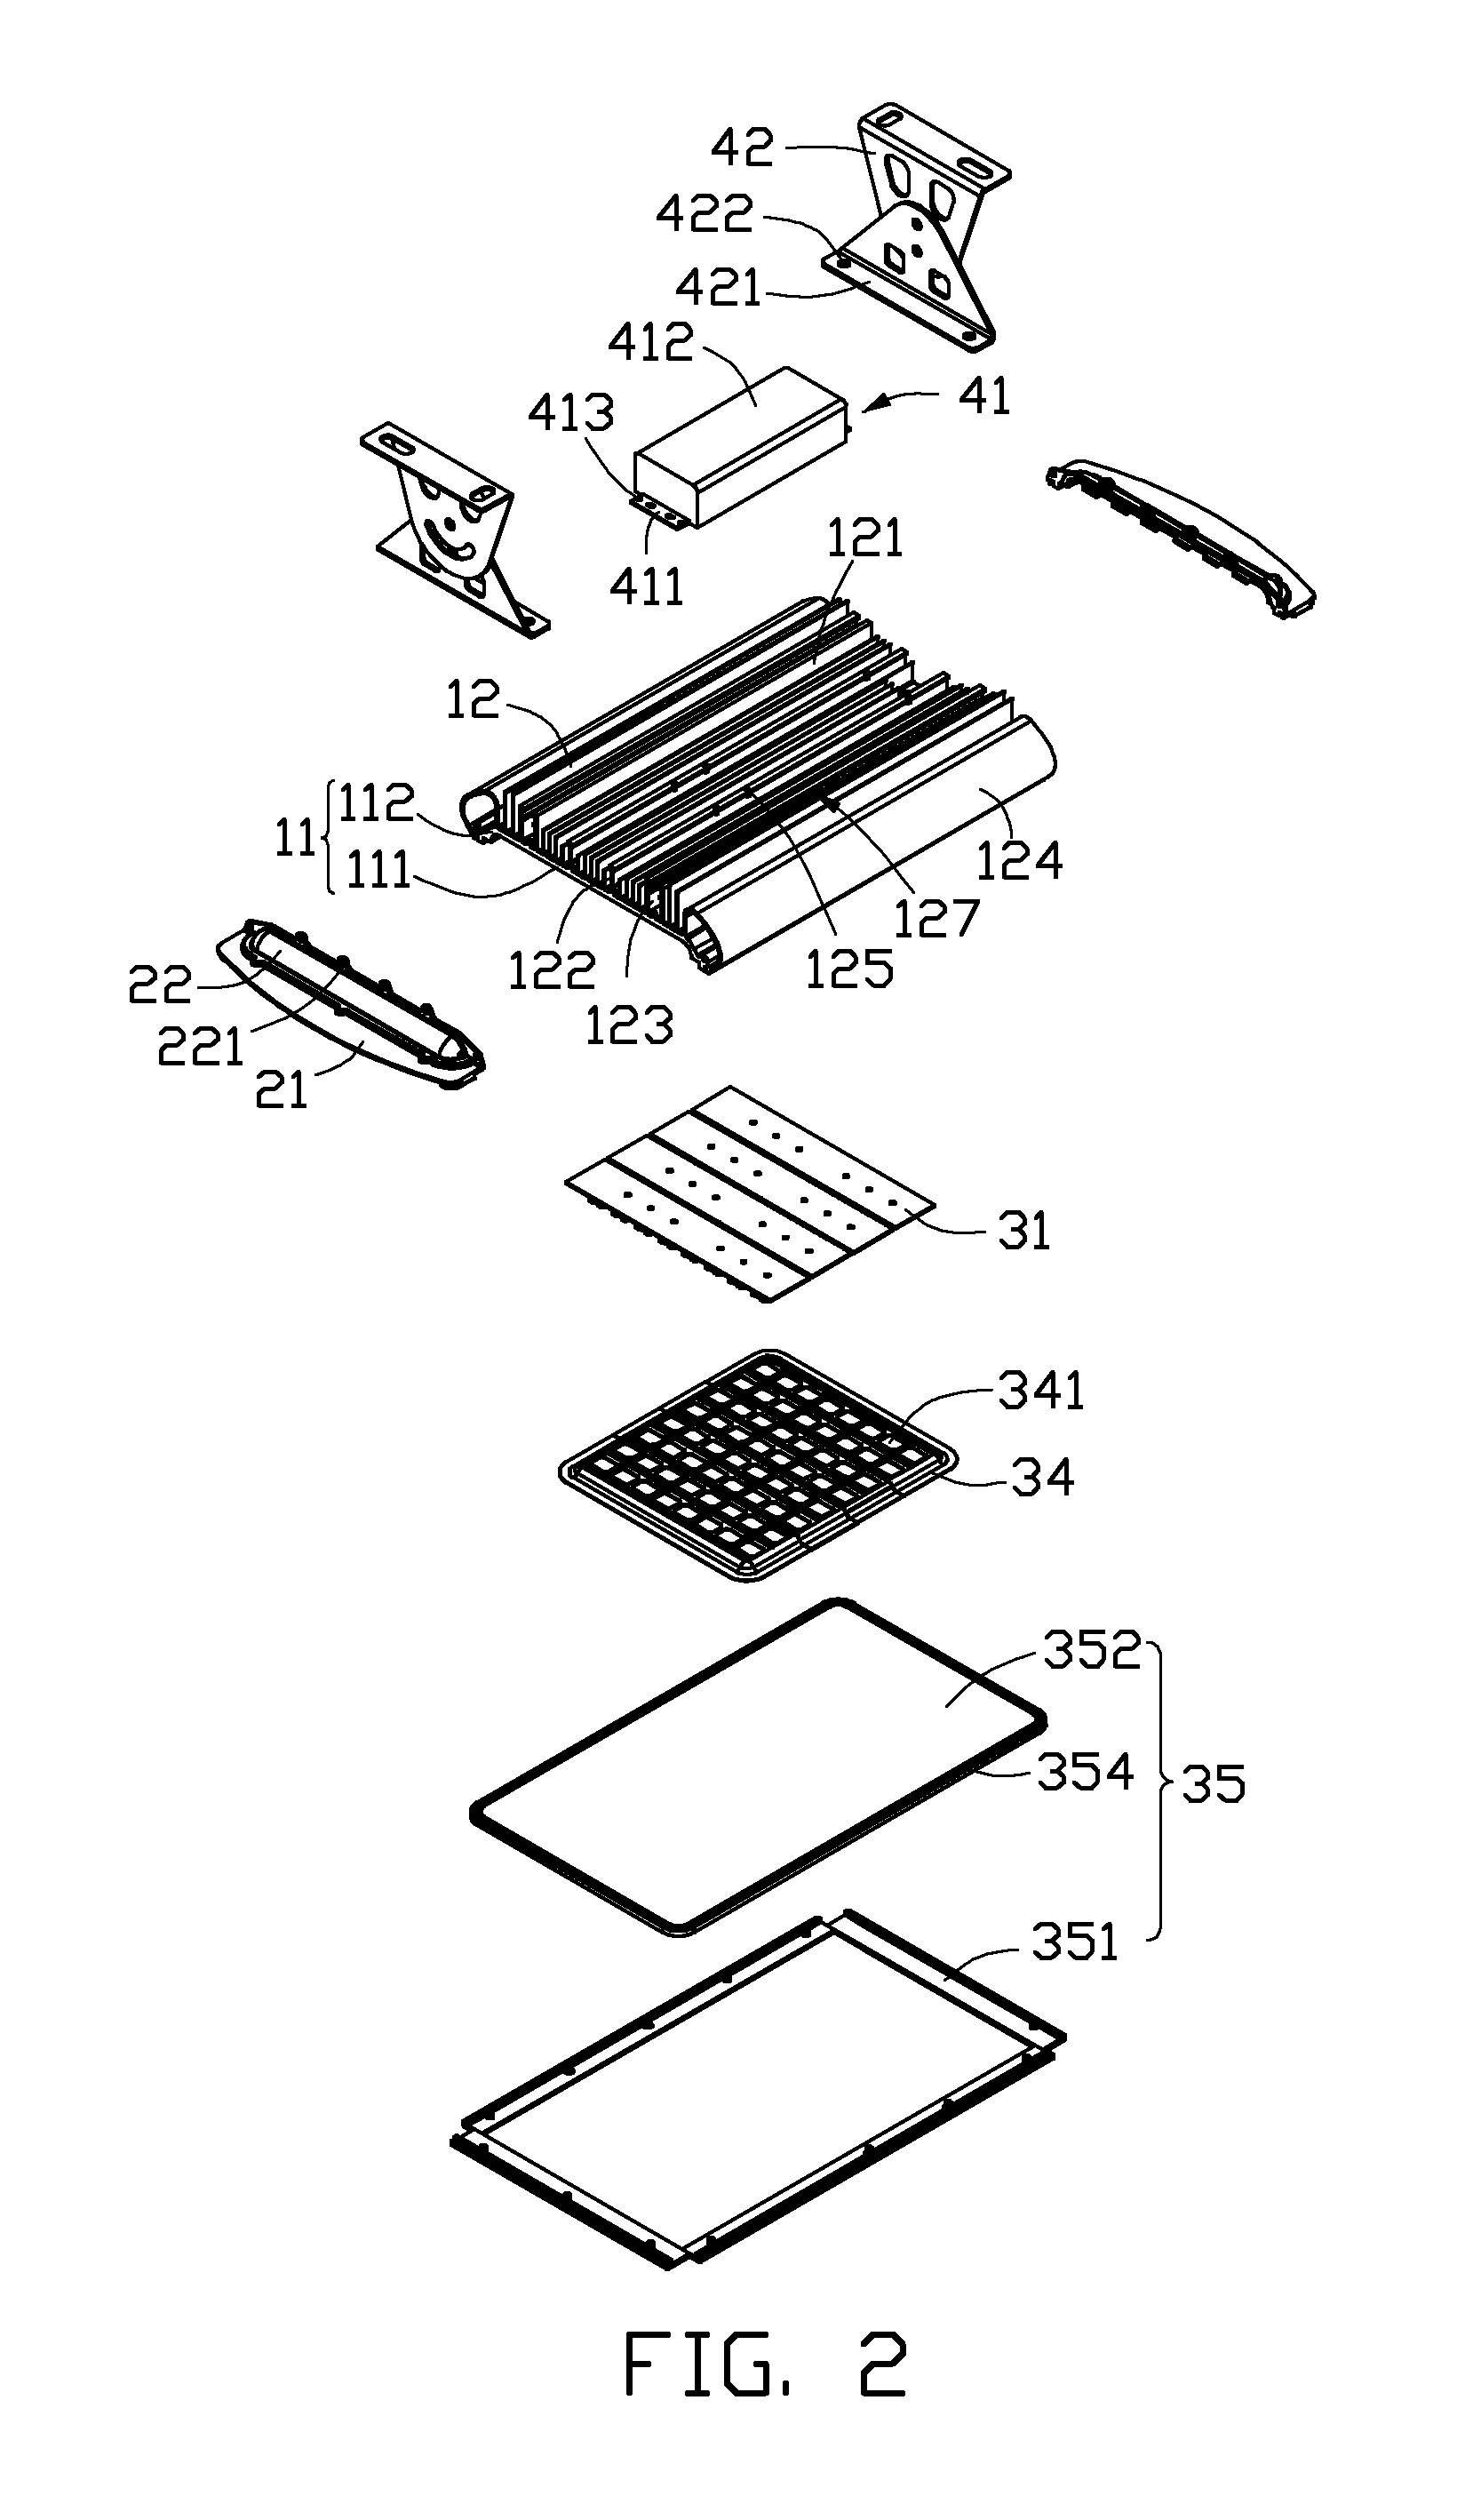 LED lamp with radiator and method for manufacturing the same